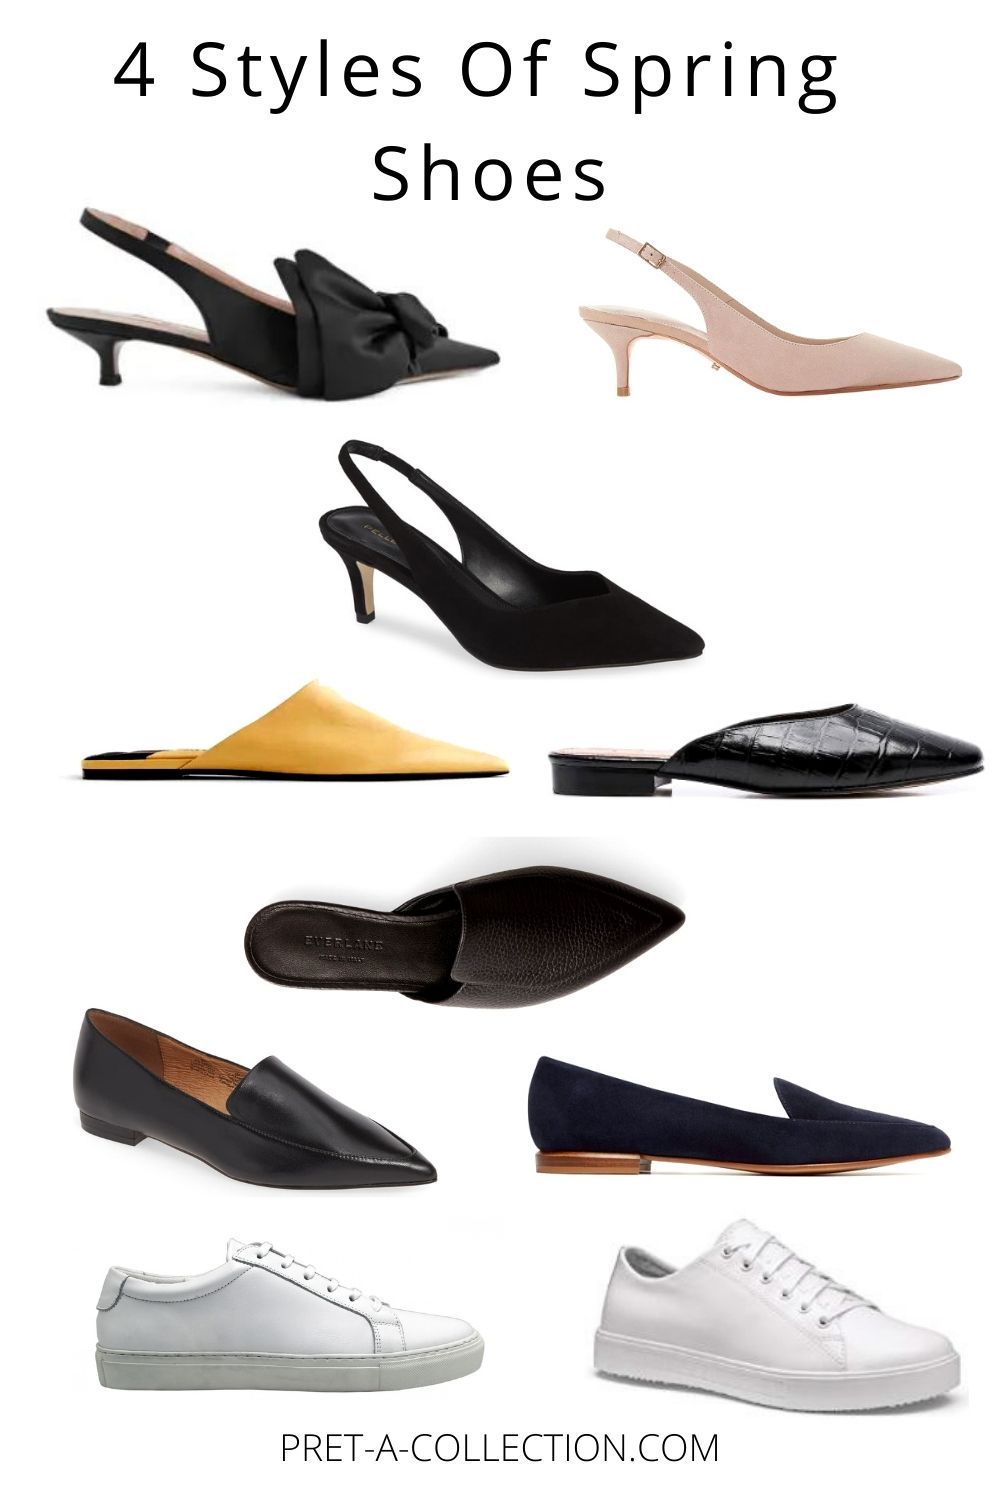 4 styles of spring shoes